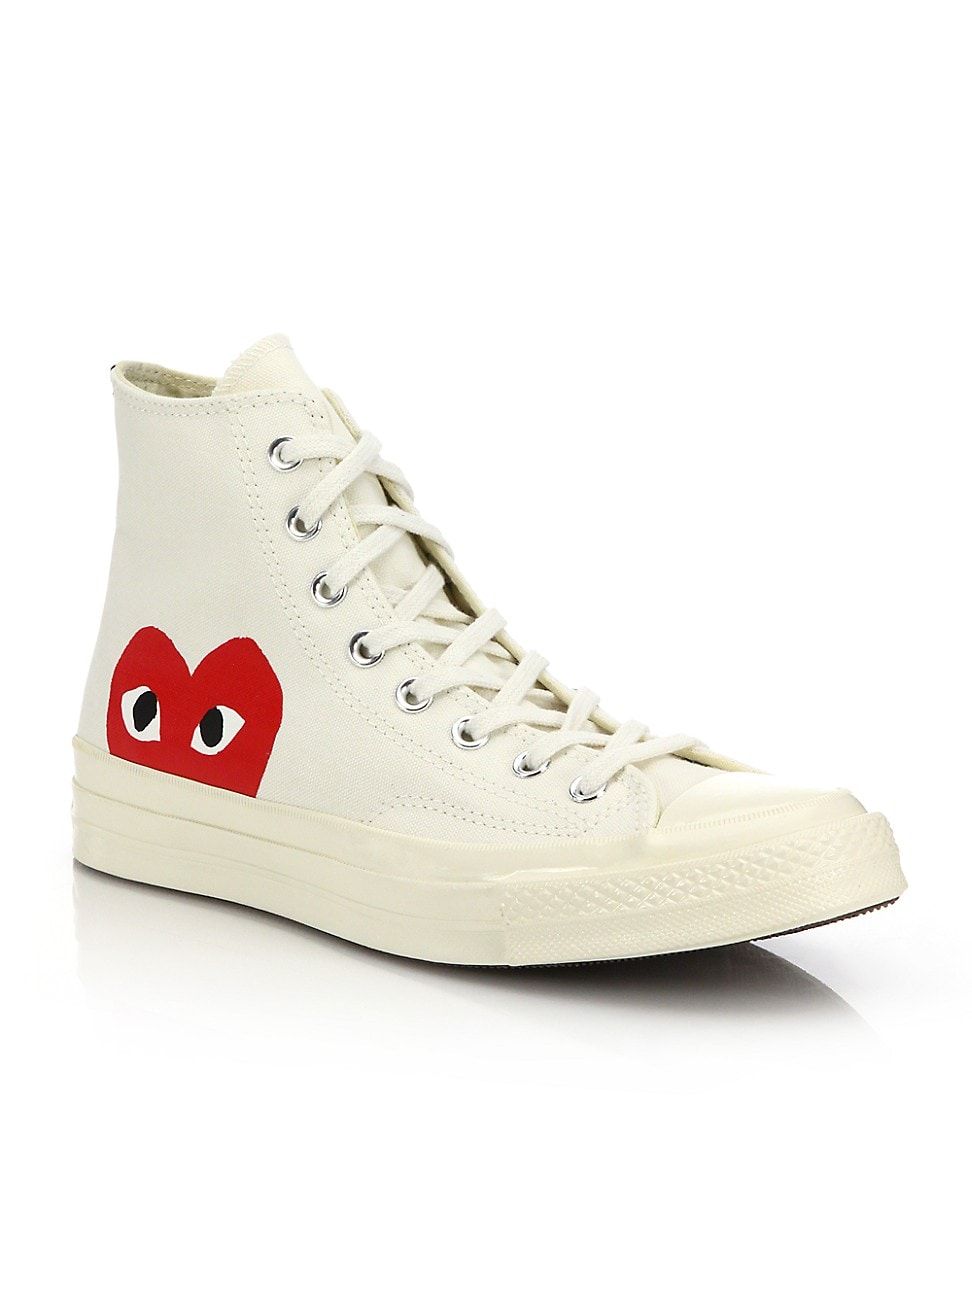 CdG PLAY x Converse Unisex Chuck Taylor All Star High-Top Sneakers - Beige - Size 10 | Saks Fifth Avenue